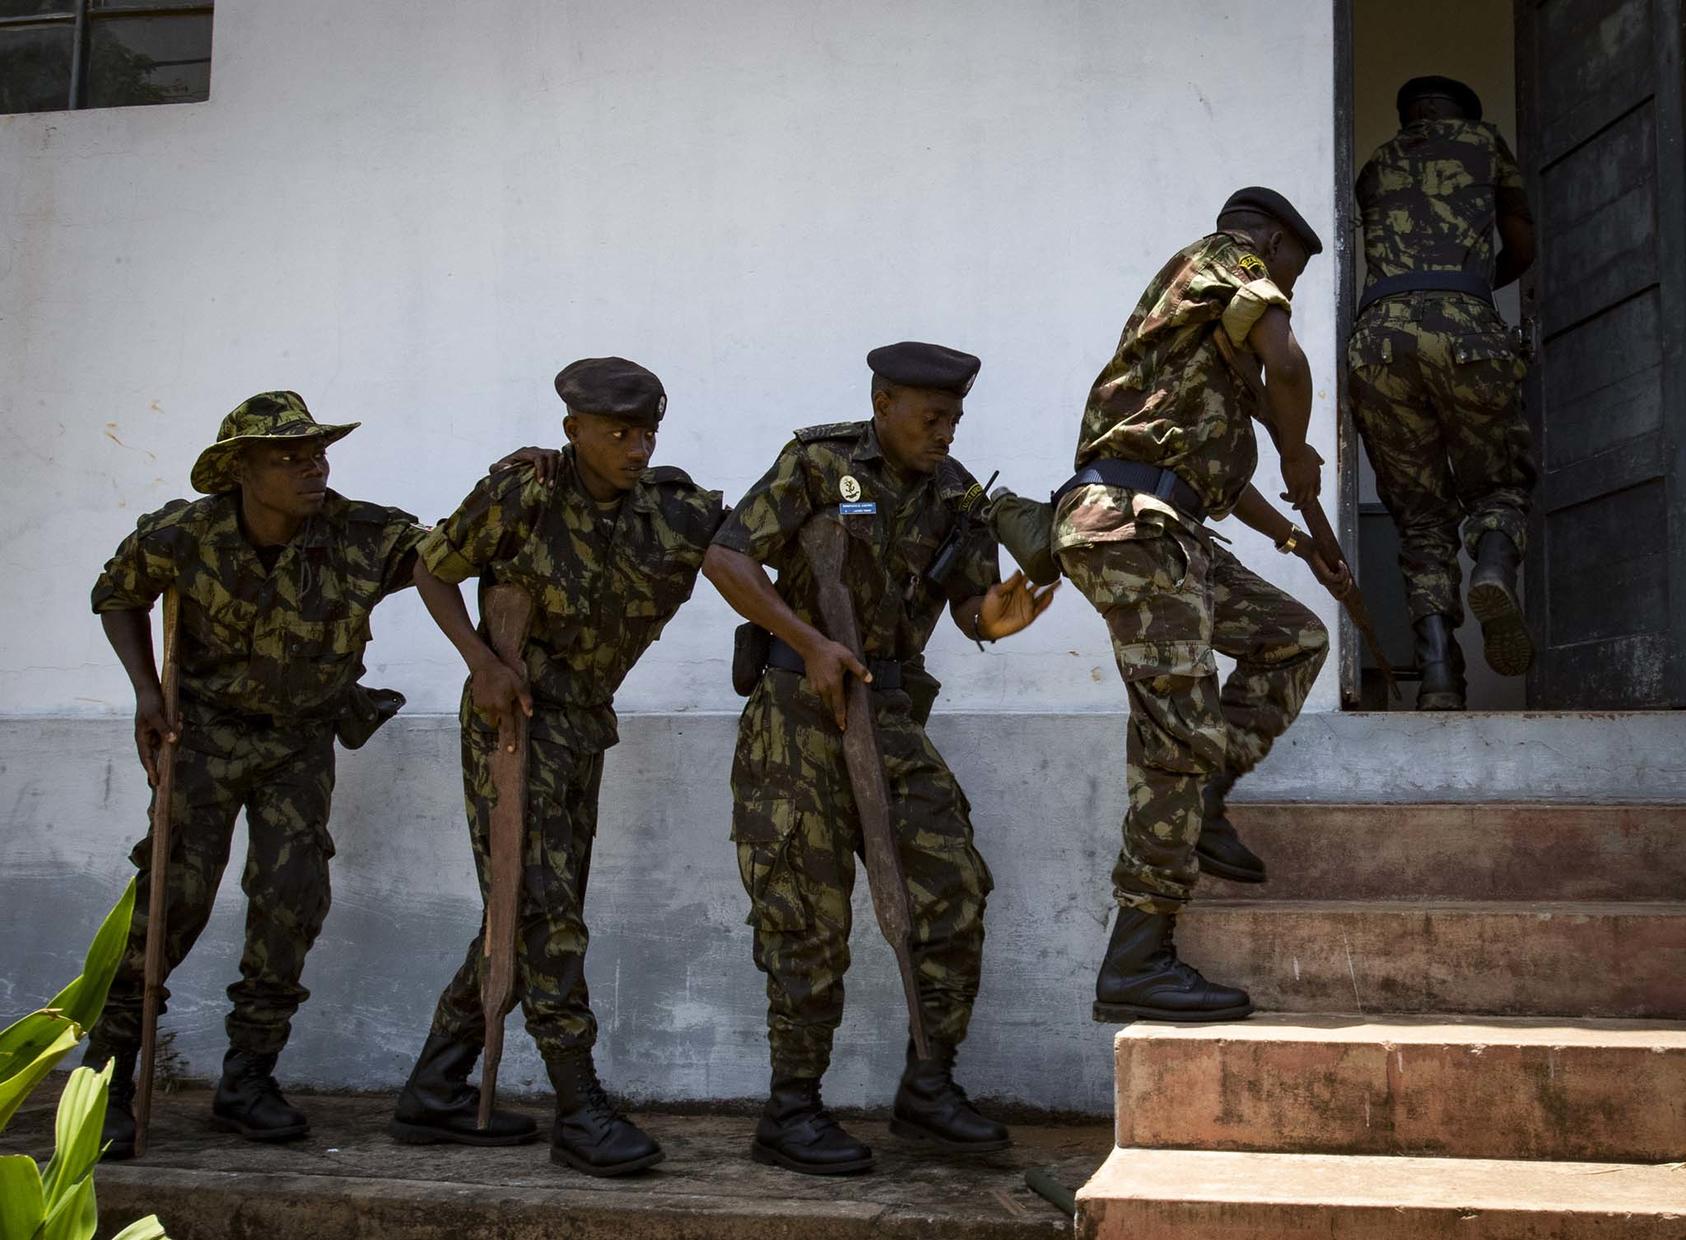 Mozambique Defence Armed Forces enter a building while participating in room clearing and close-quarters combat training during exercise, Jan. 30, 2019. (U.S. Navy/Mass Communication Specialist 1st Class Kyle Steckler)